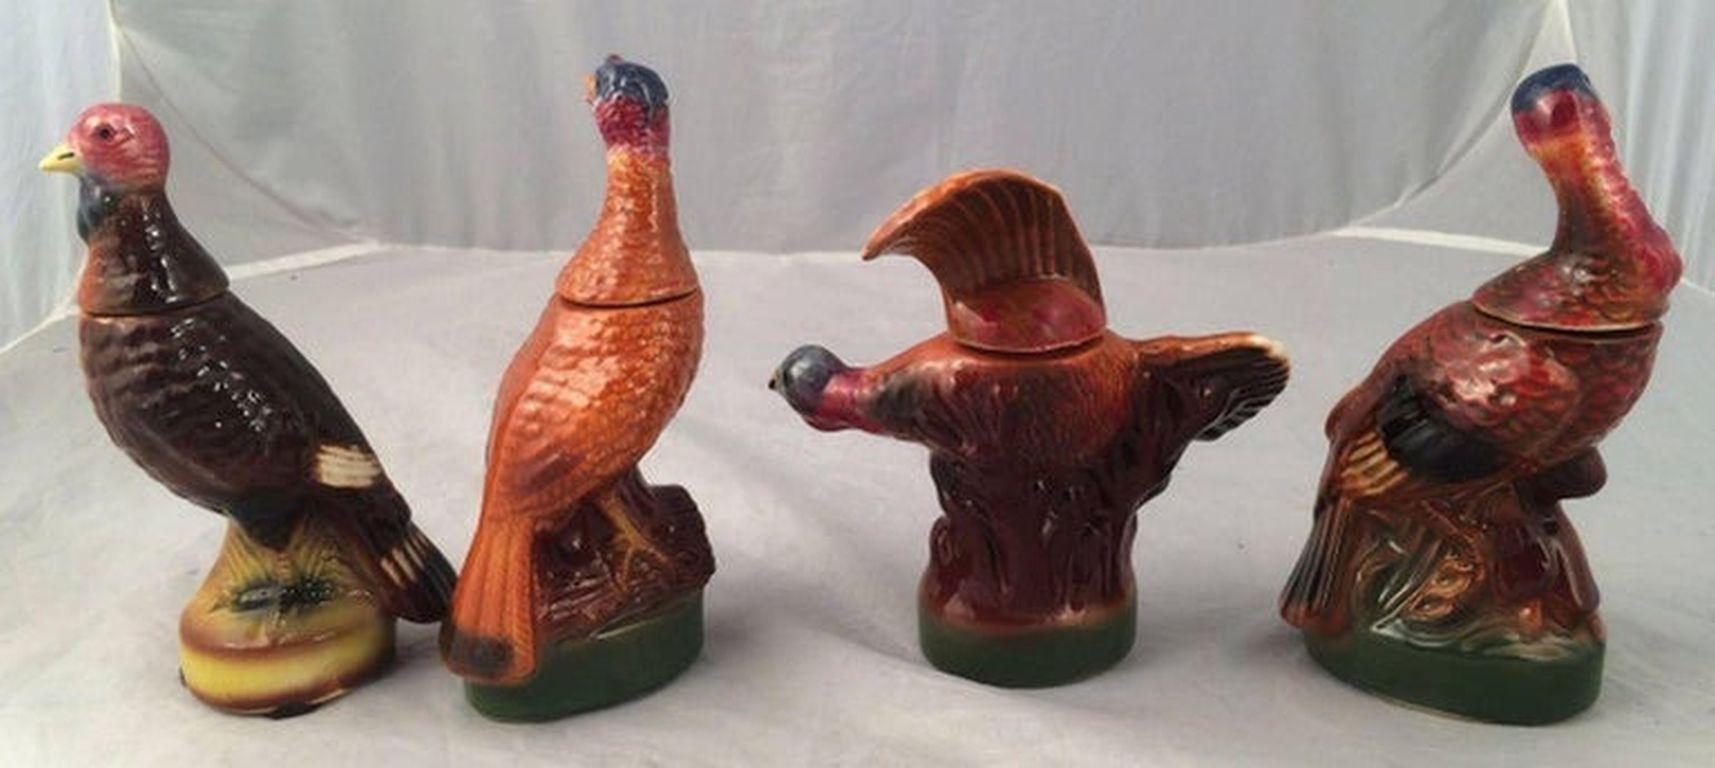 A set of eight vintage mini wild Turkey decanters featuring the popular and hard-to-find #3 flying and #8 fan-tail decanters.

Each mini marked on base with design number.

Ceramic creation collectible liquor bottles made for Austin Nichols Wild